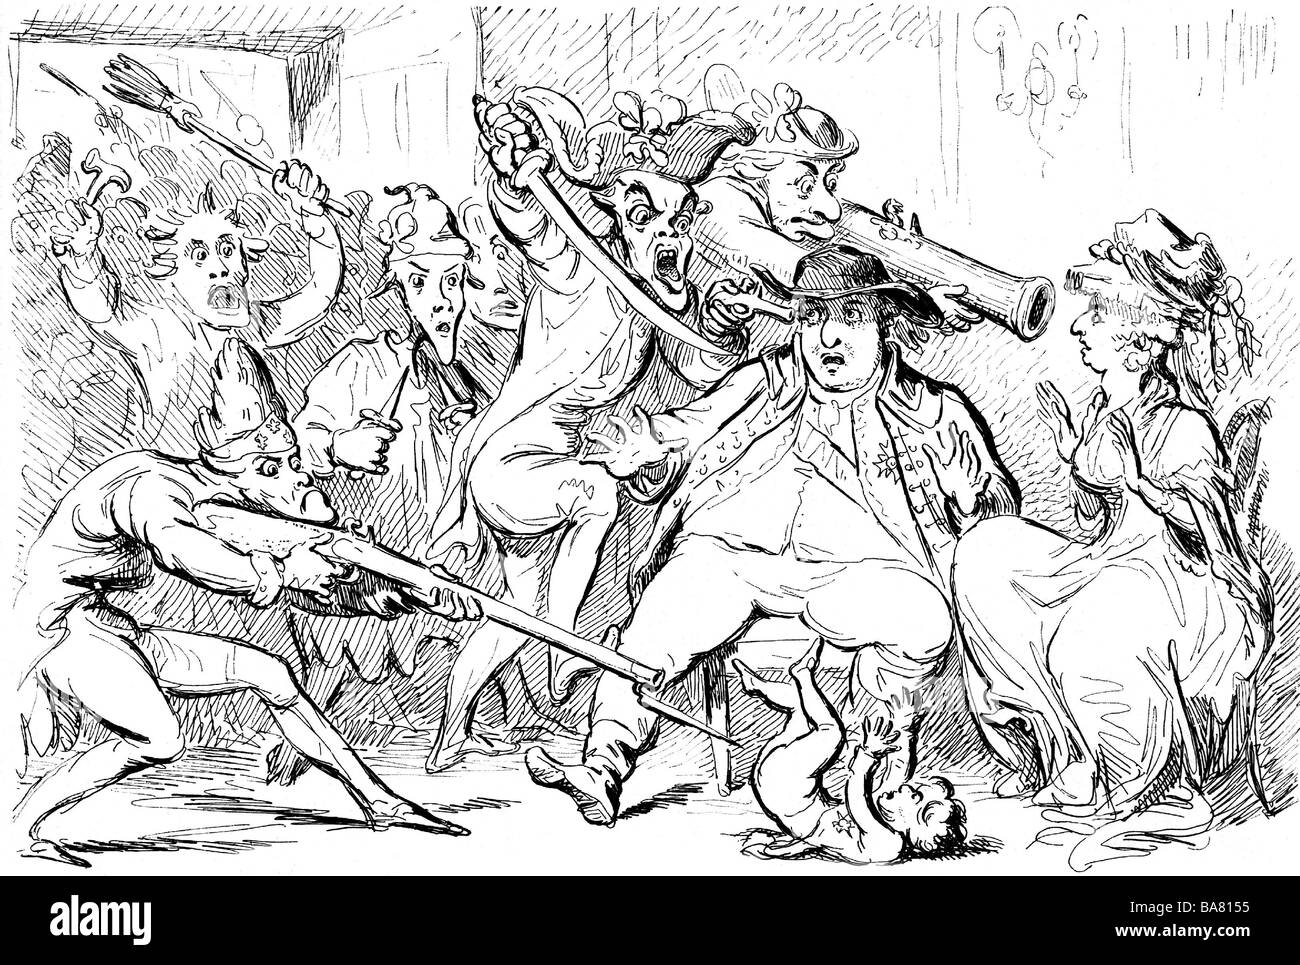 Caricature on the flight of the french king louis-philippe i. … free public  domain image